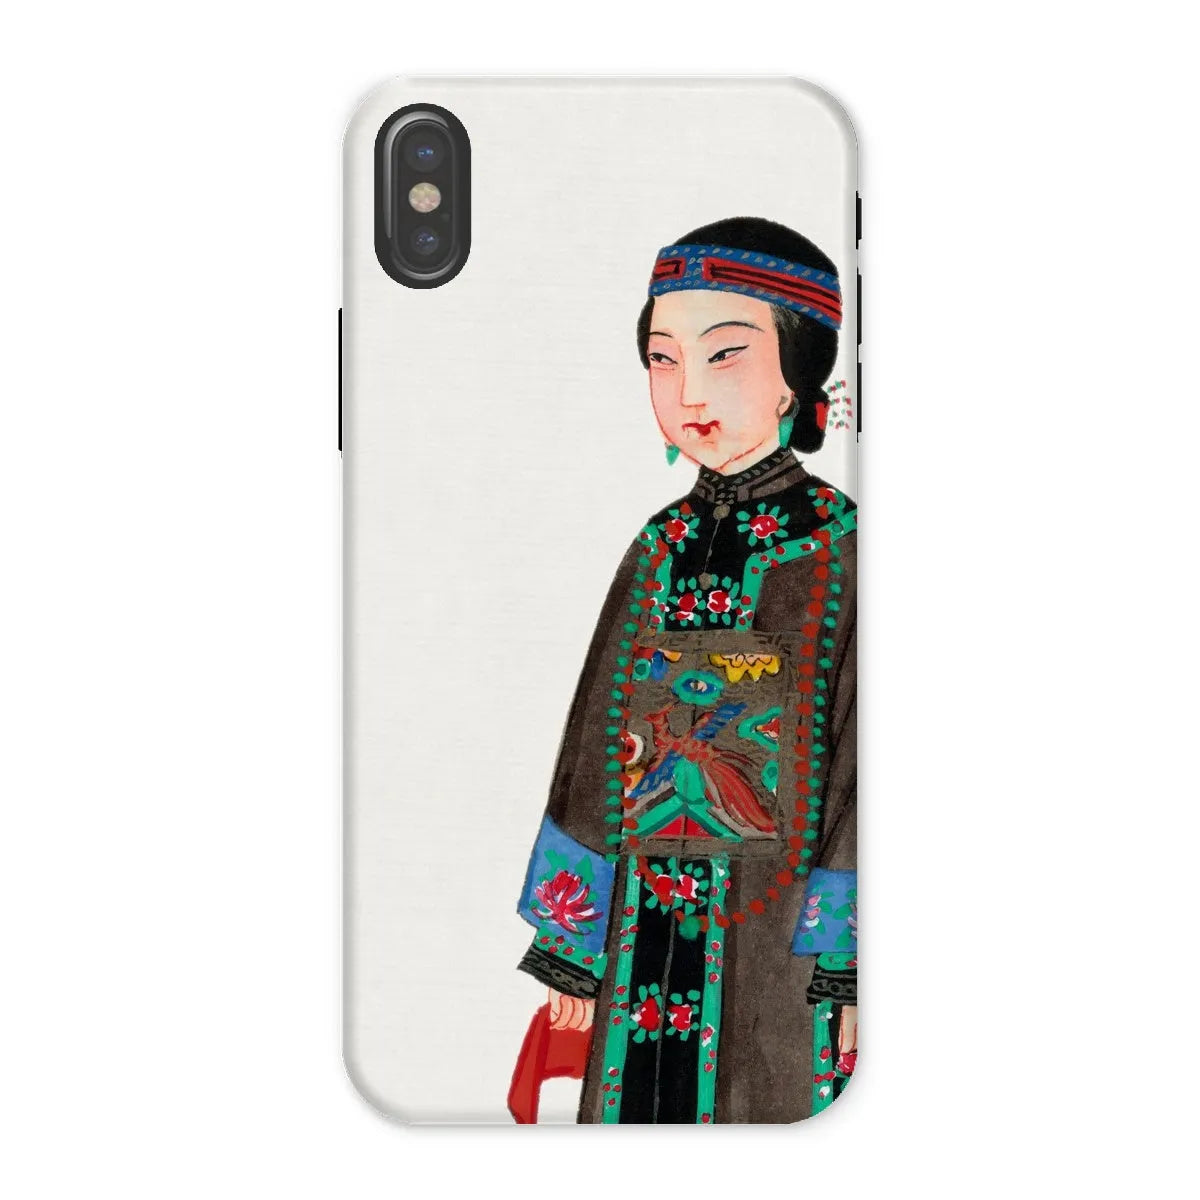 Noblewoman At Court - Chinese Aesthetic Art Phone Case - Iphone x / Matte - Mobile Phone Cases - Aesthetic Art